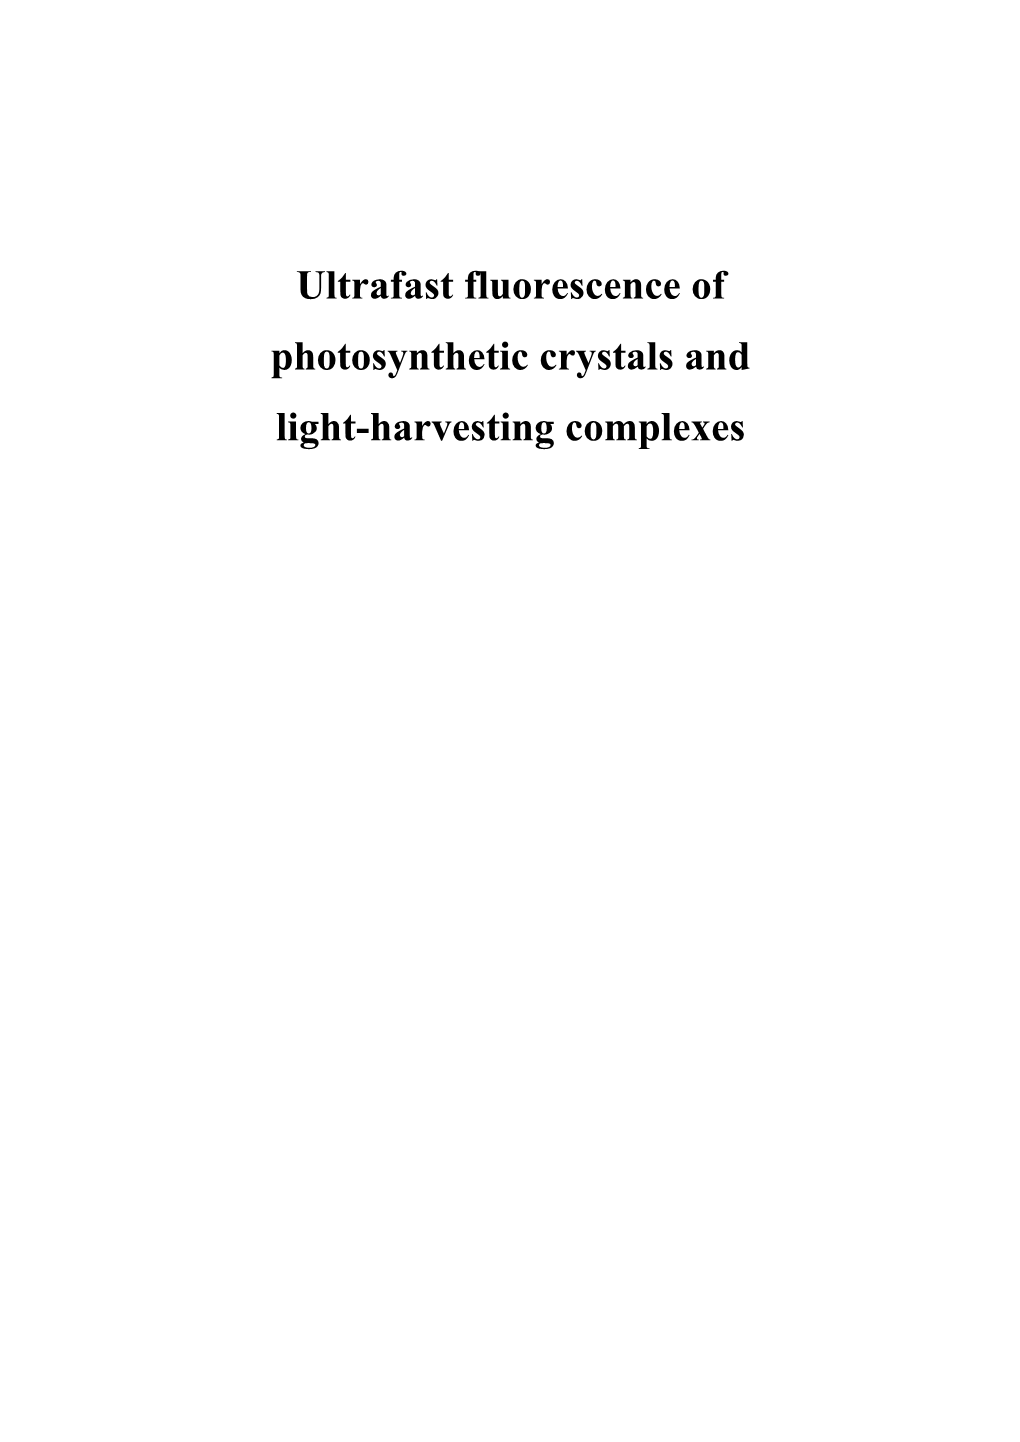 Ultrafast Fluorescence of Photosynthetic Crystals and Light-Harvesting Complexes